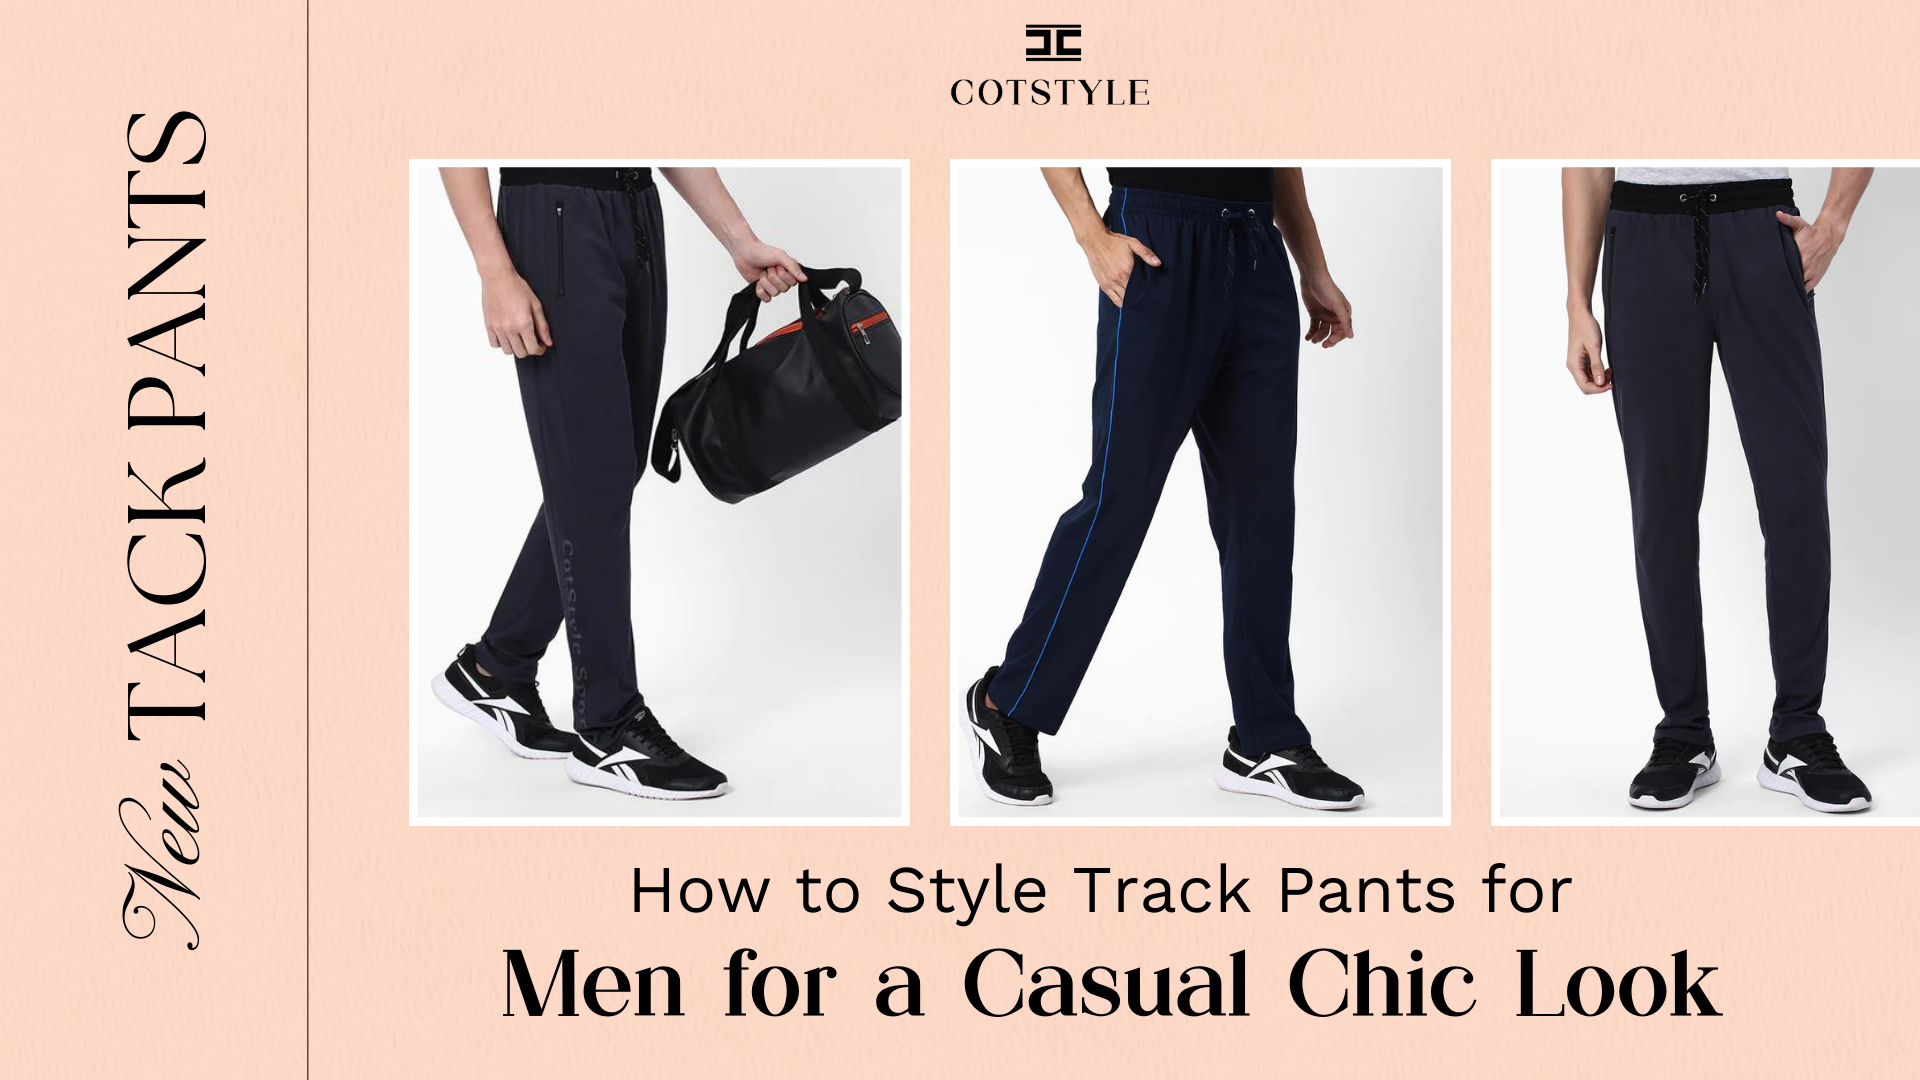 How to Style Track Pants for Men for a Casual Chic Look